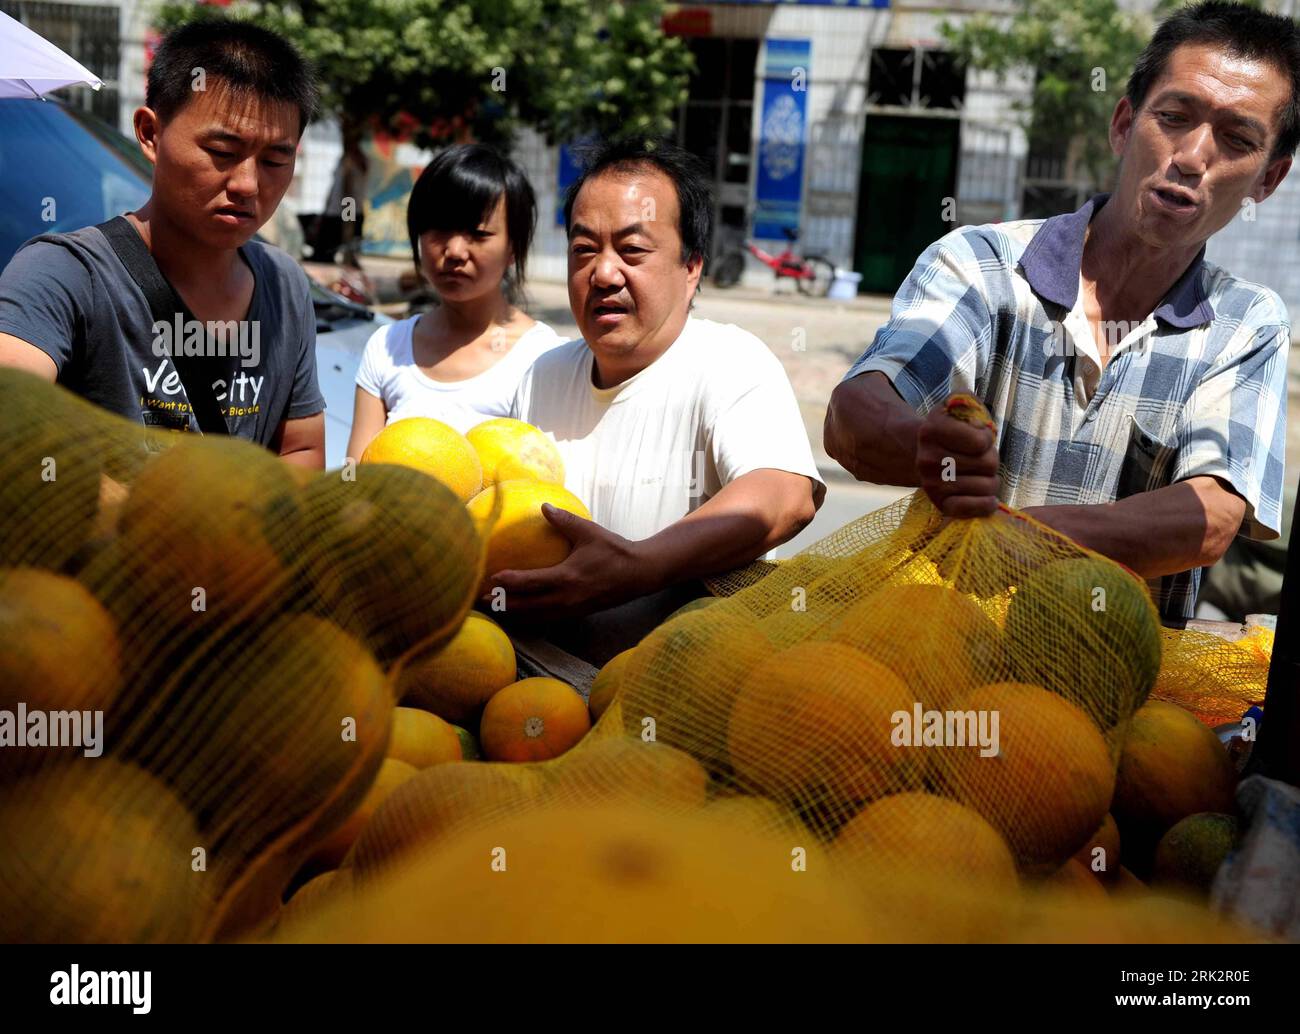 Bildnummer: 53235422  Datum: 01.08.2009  Copyright: imago/Xinhua (090801) -- DENGKOU, Aug. 1, 2009 (Xinhua) -- Consumers buy honeydew melons in Bayan Gol of Dengkou County in north China s Inner Mongolia Autonomous Region, July 31, 2009. Large amount of honeydew melons and watermelons from Inner Mongolia have come to the market in China. (Xinhua/Ren Junchuan) (hdt) (2)CHINA-INNER MONGOLIA-HONEYDEW MELON (CN)  PUBLICATIONxNOTxINxCHN  Honigmelone Honigmelonen Melone Melonen Mongolei kbdig xsk  2009 quer     Image number 53235422 Date 01 08 2009 Copyright Imago XINHUA 090801 Dengkou Aug 1 2009 XI Stock Photo